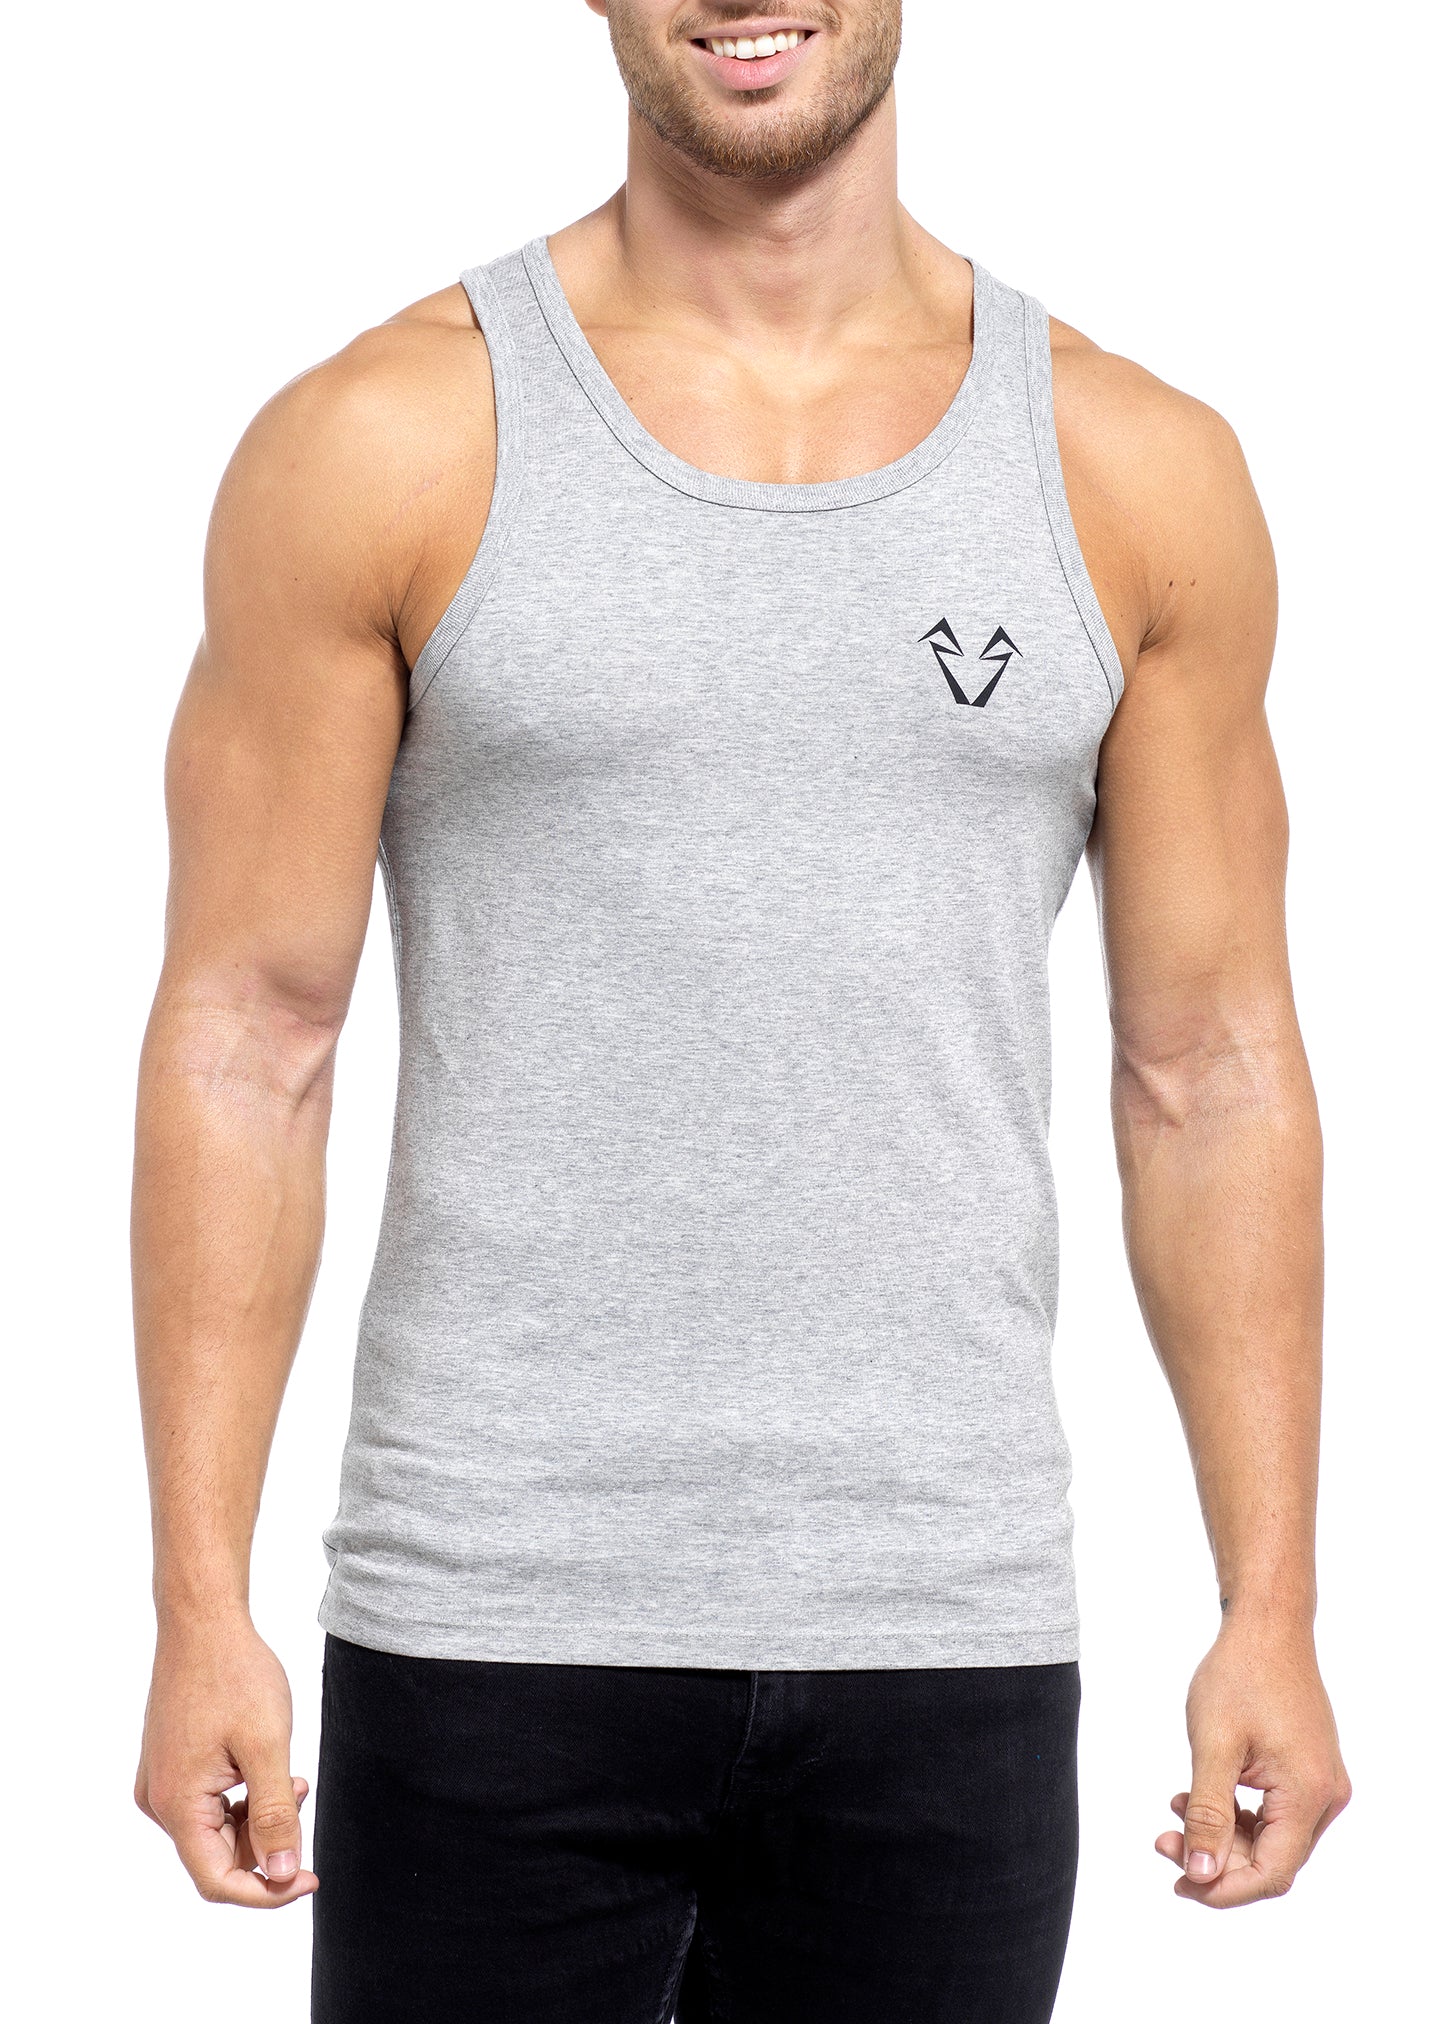 Mens Muscle Fit Grey Tops